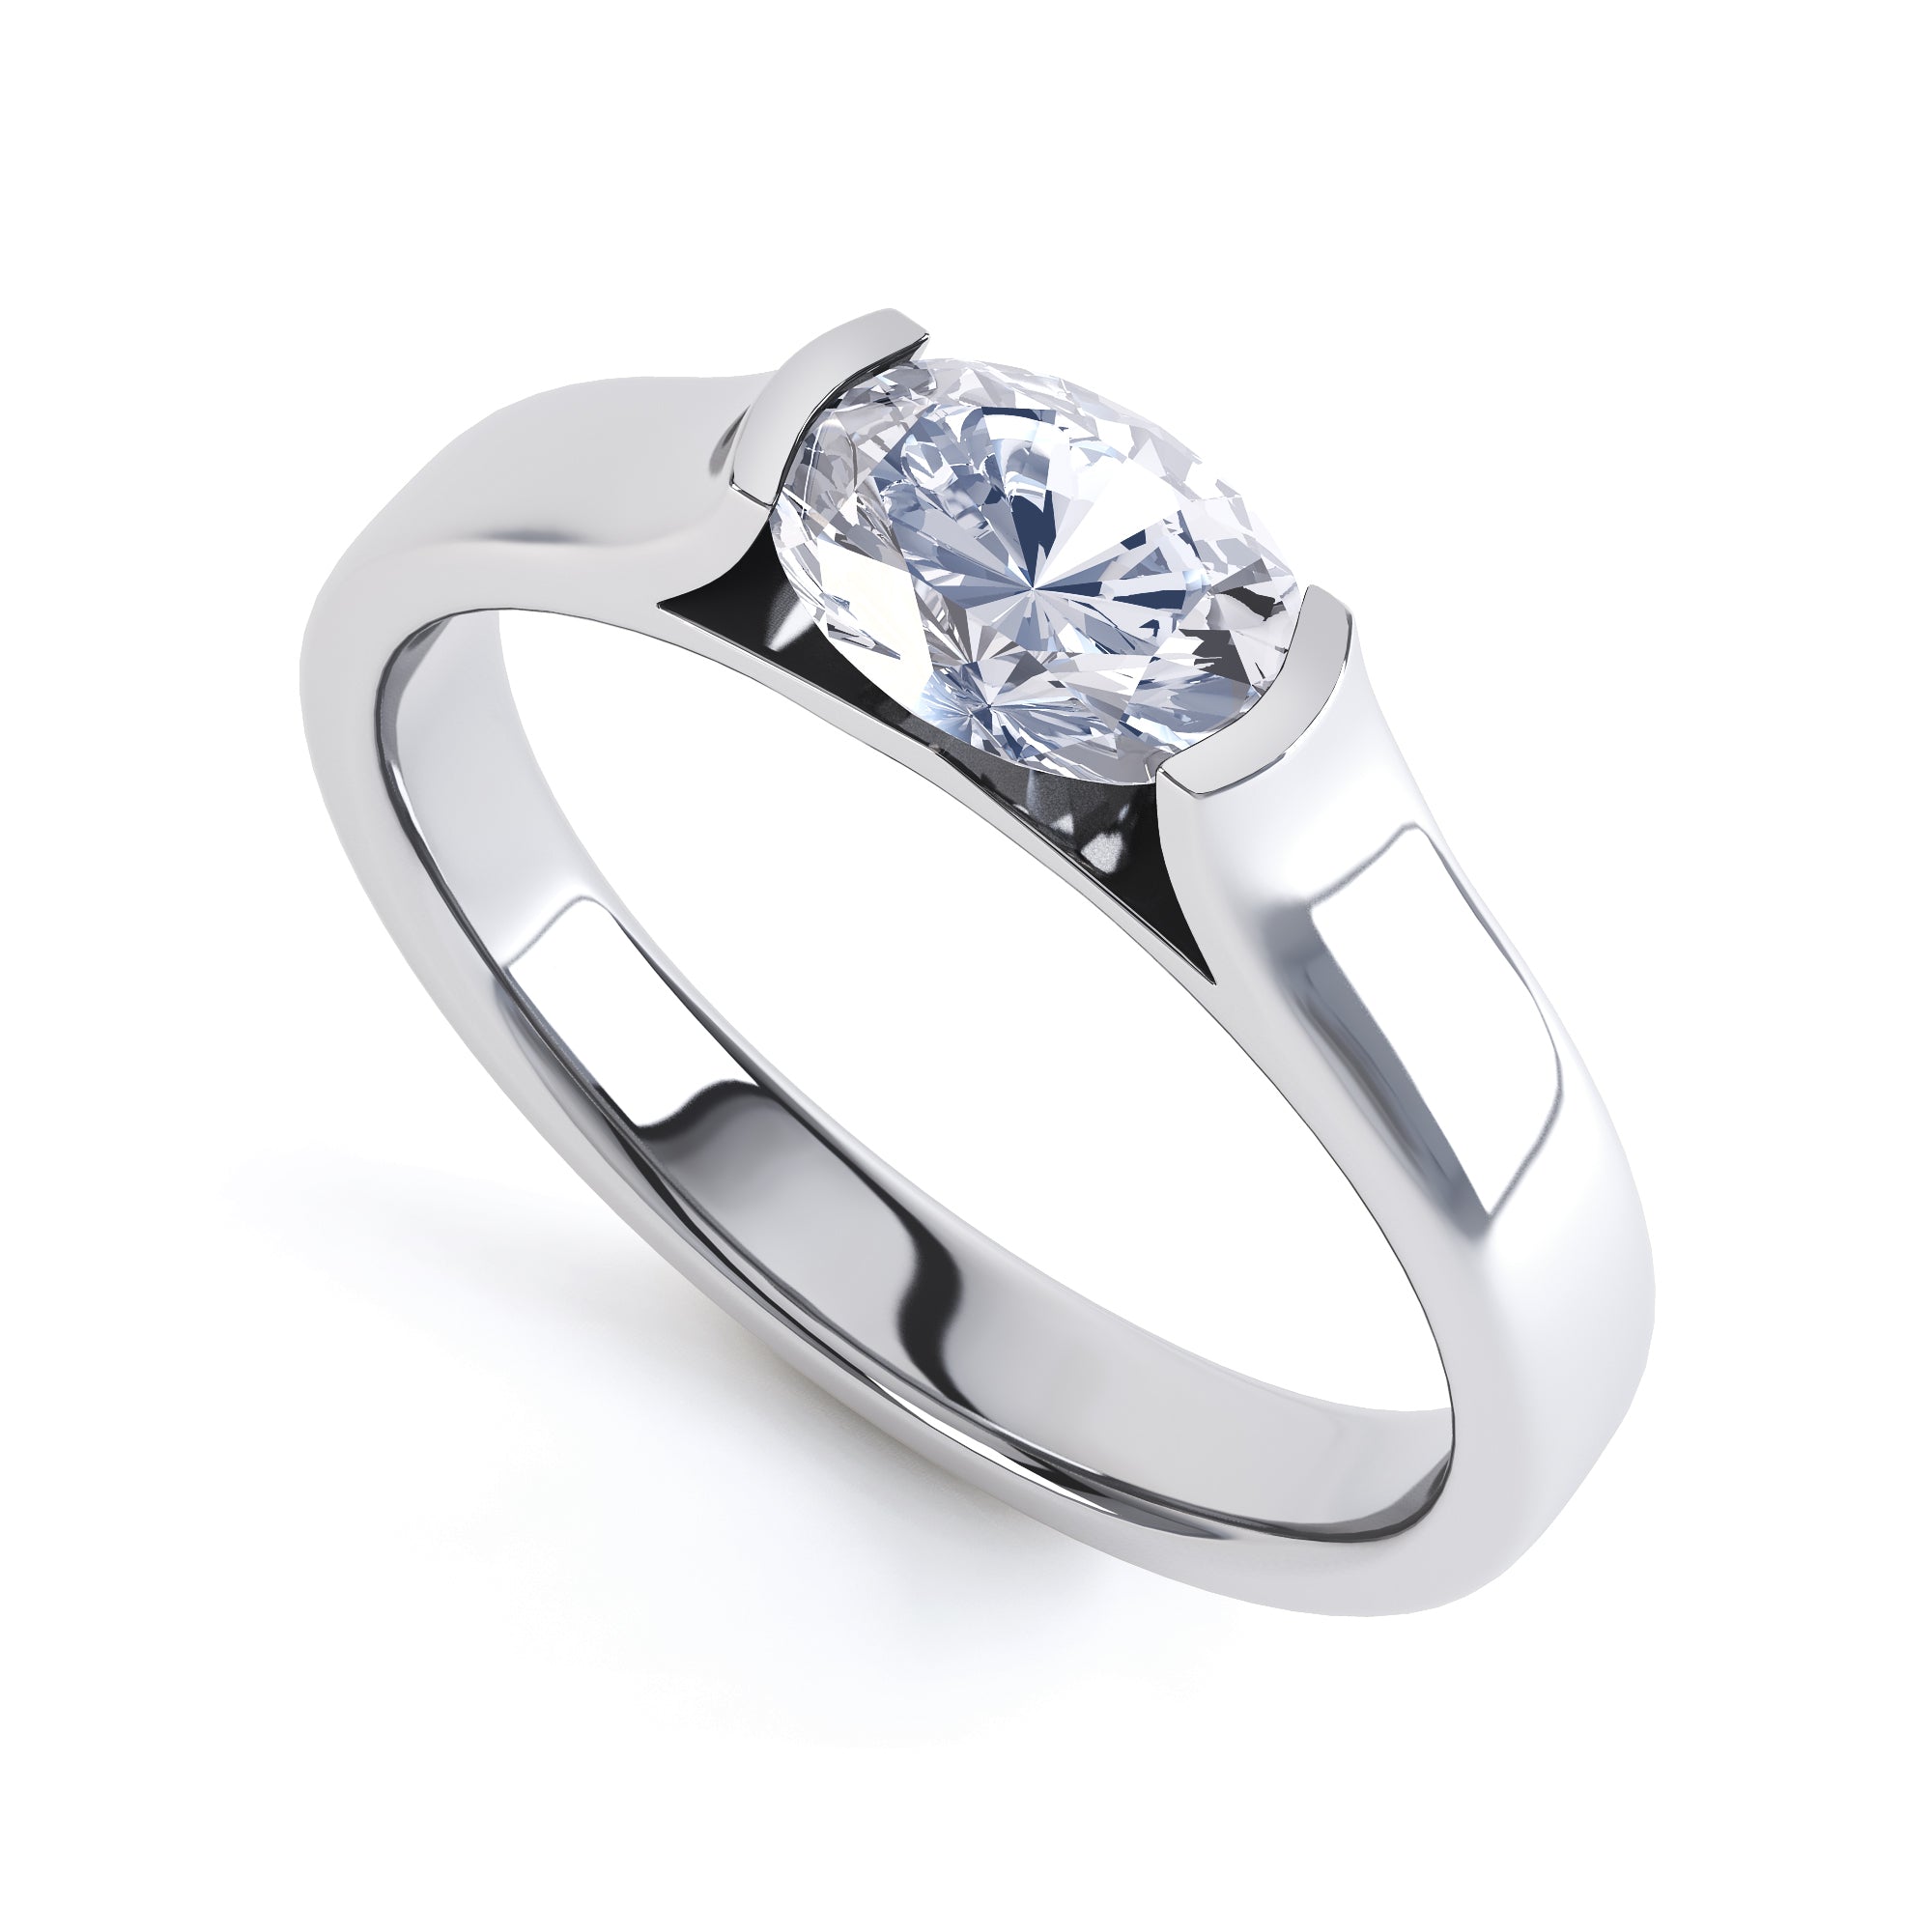 Oval Cut Centre Stone, Tension set , Diamond Engagement Ring